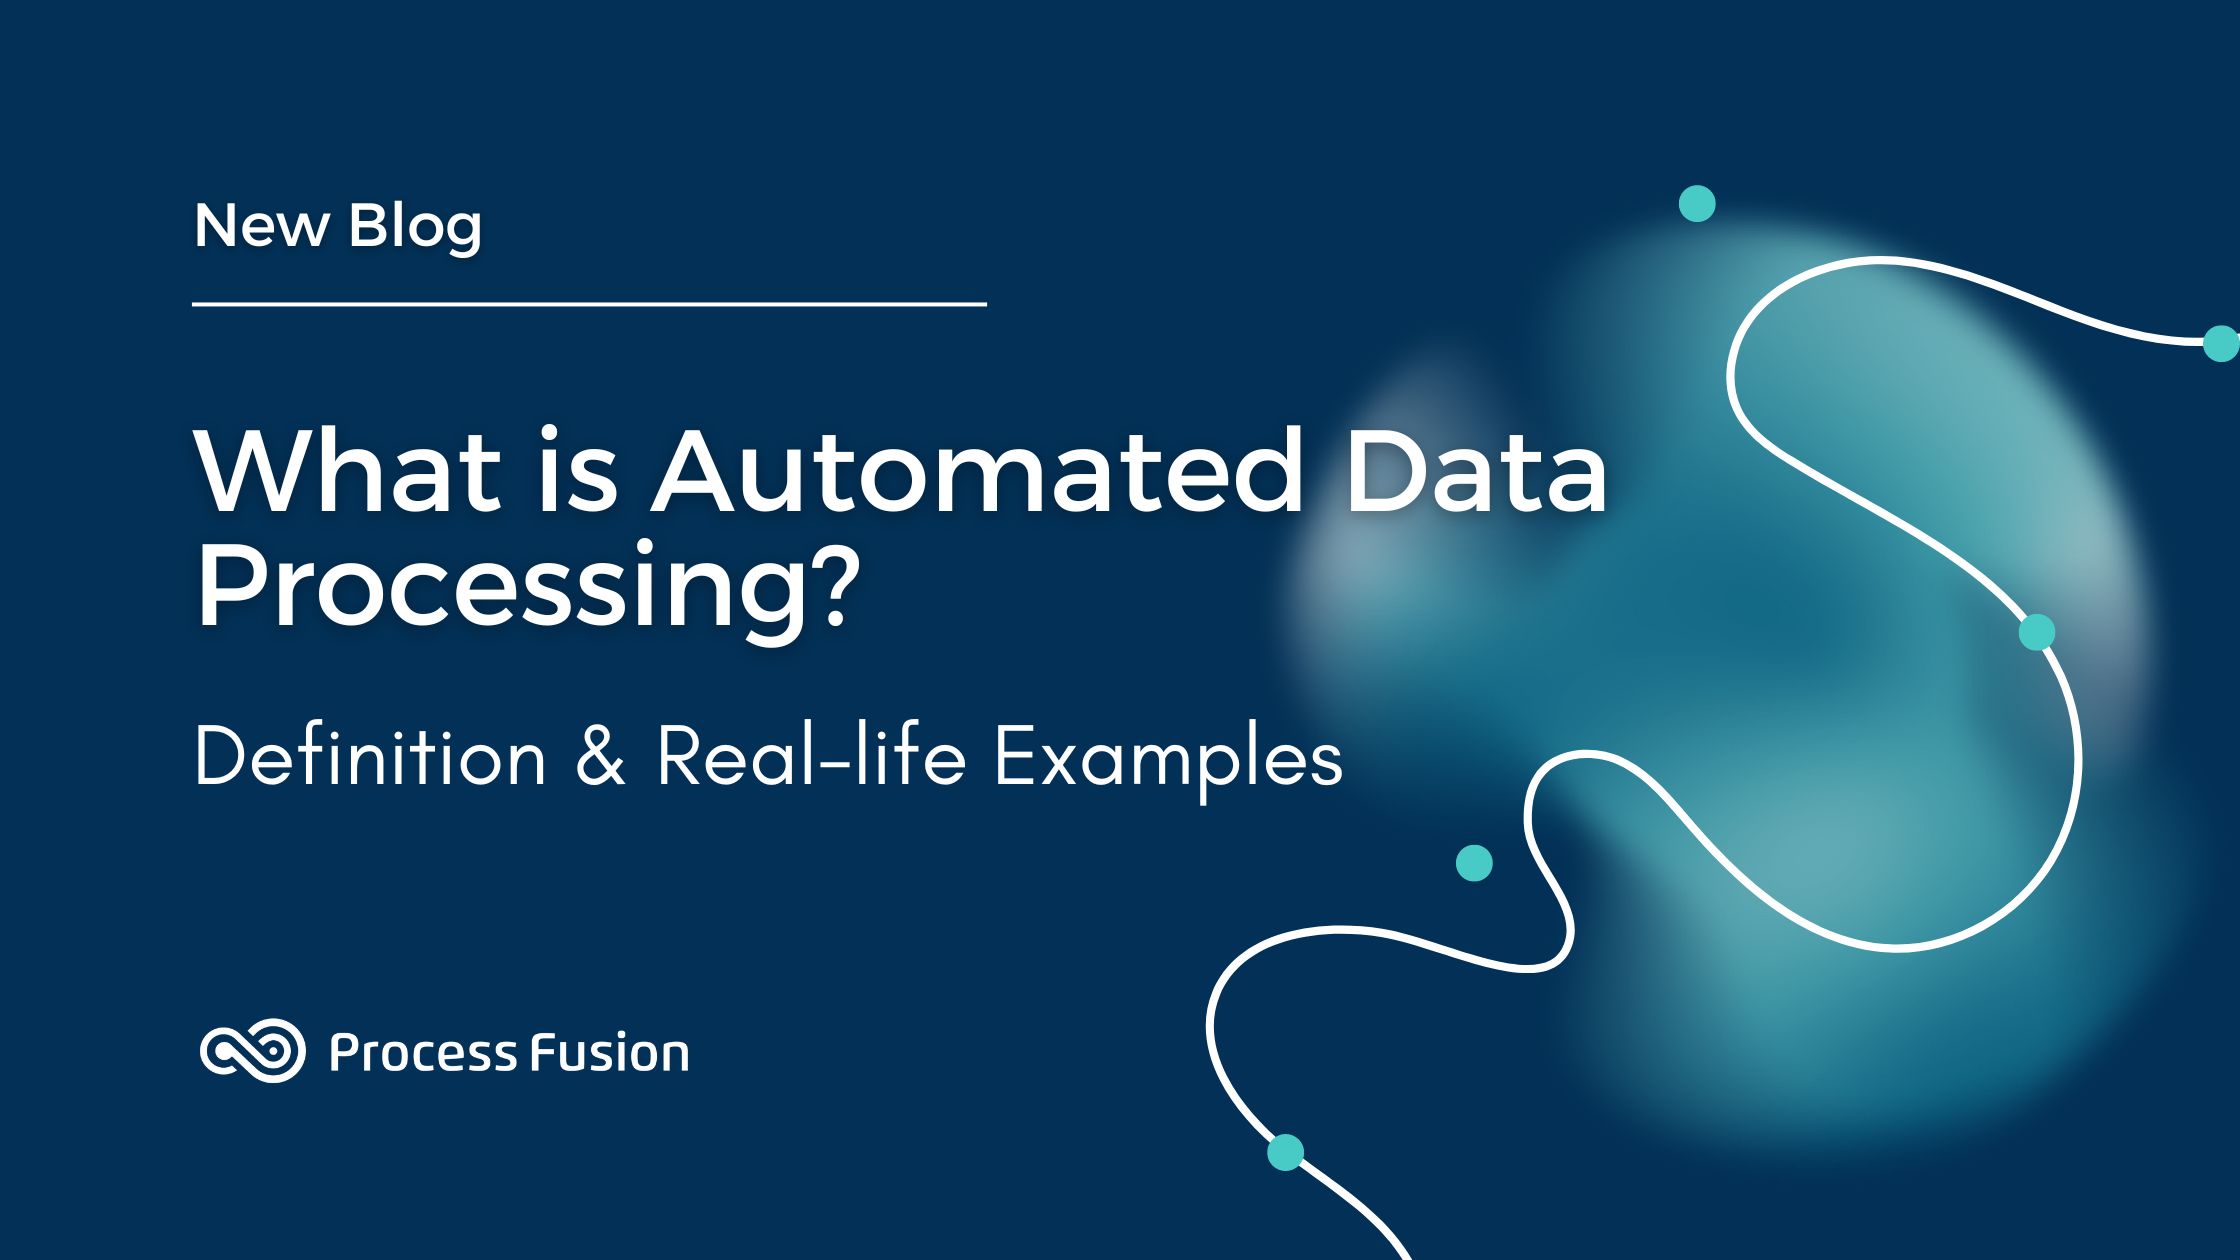 What is Automated Data Processing